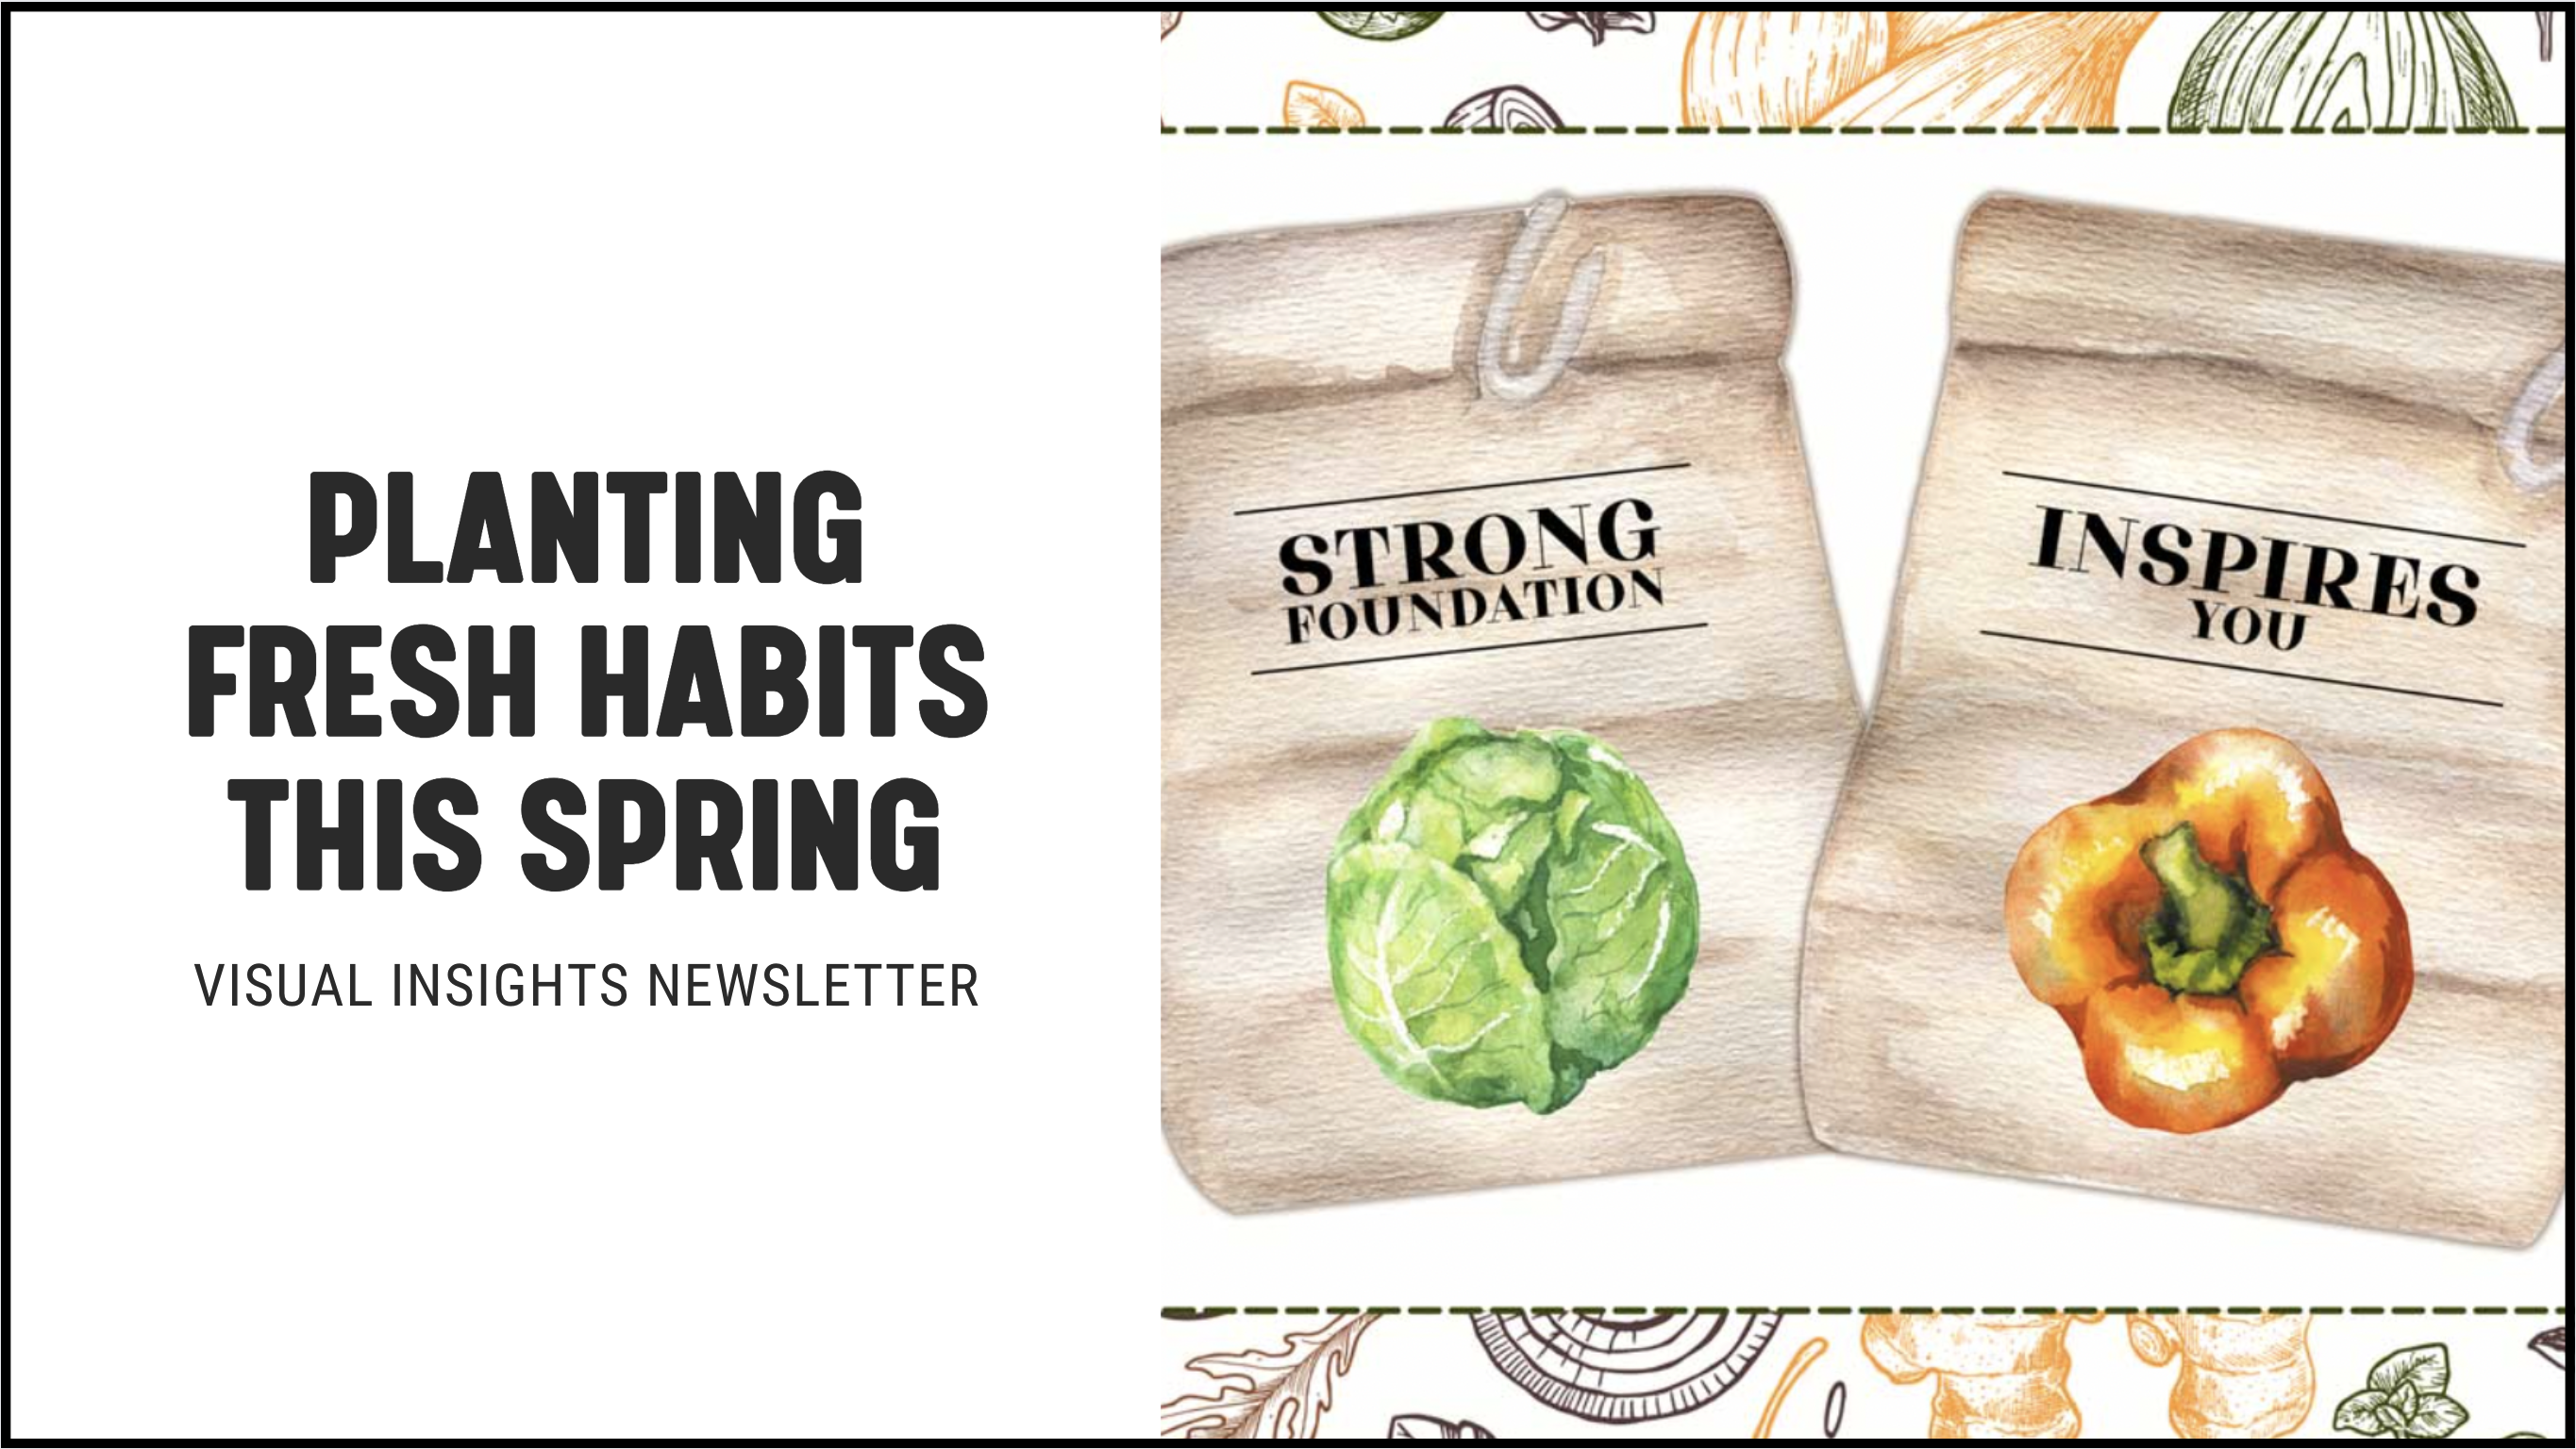 [NEW] Planting Fresh Habits this Spring - Visual Insights Newsletter Marketing Campaigns For Financial Advisors